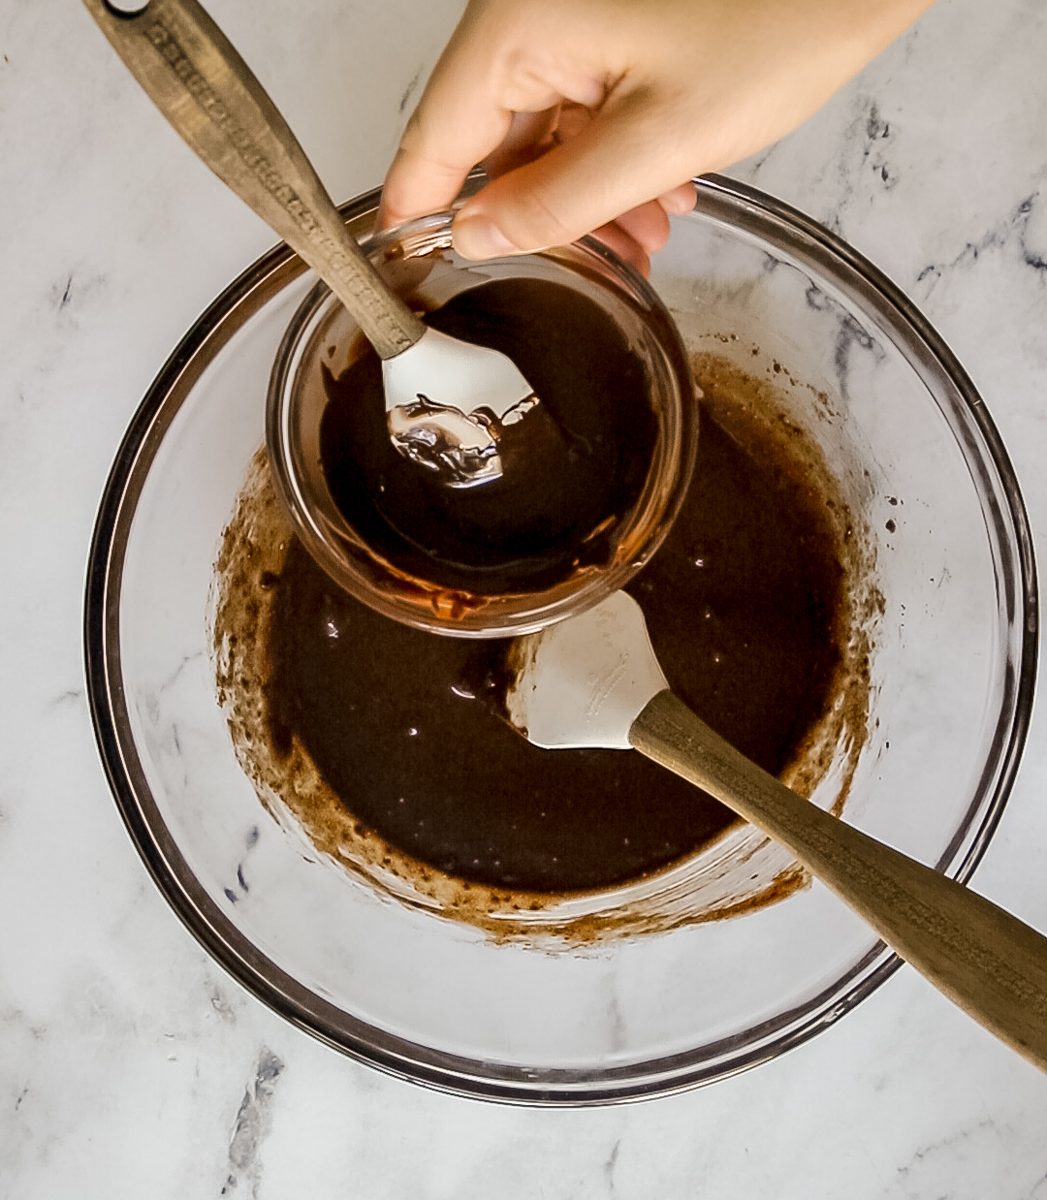 melted chocolate chips in small bowl being added to mixing bowl of double chocolate crinkle cookie batter